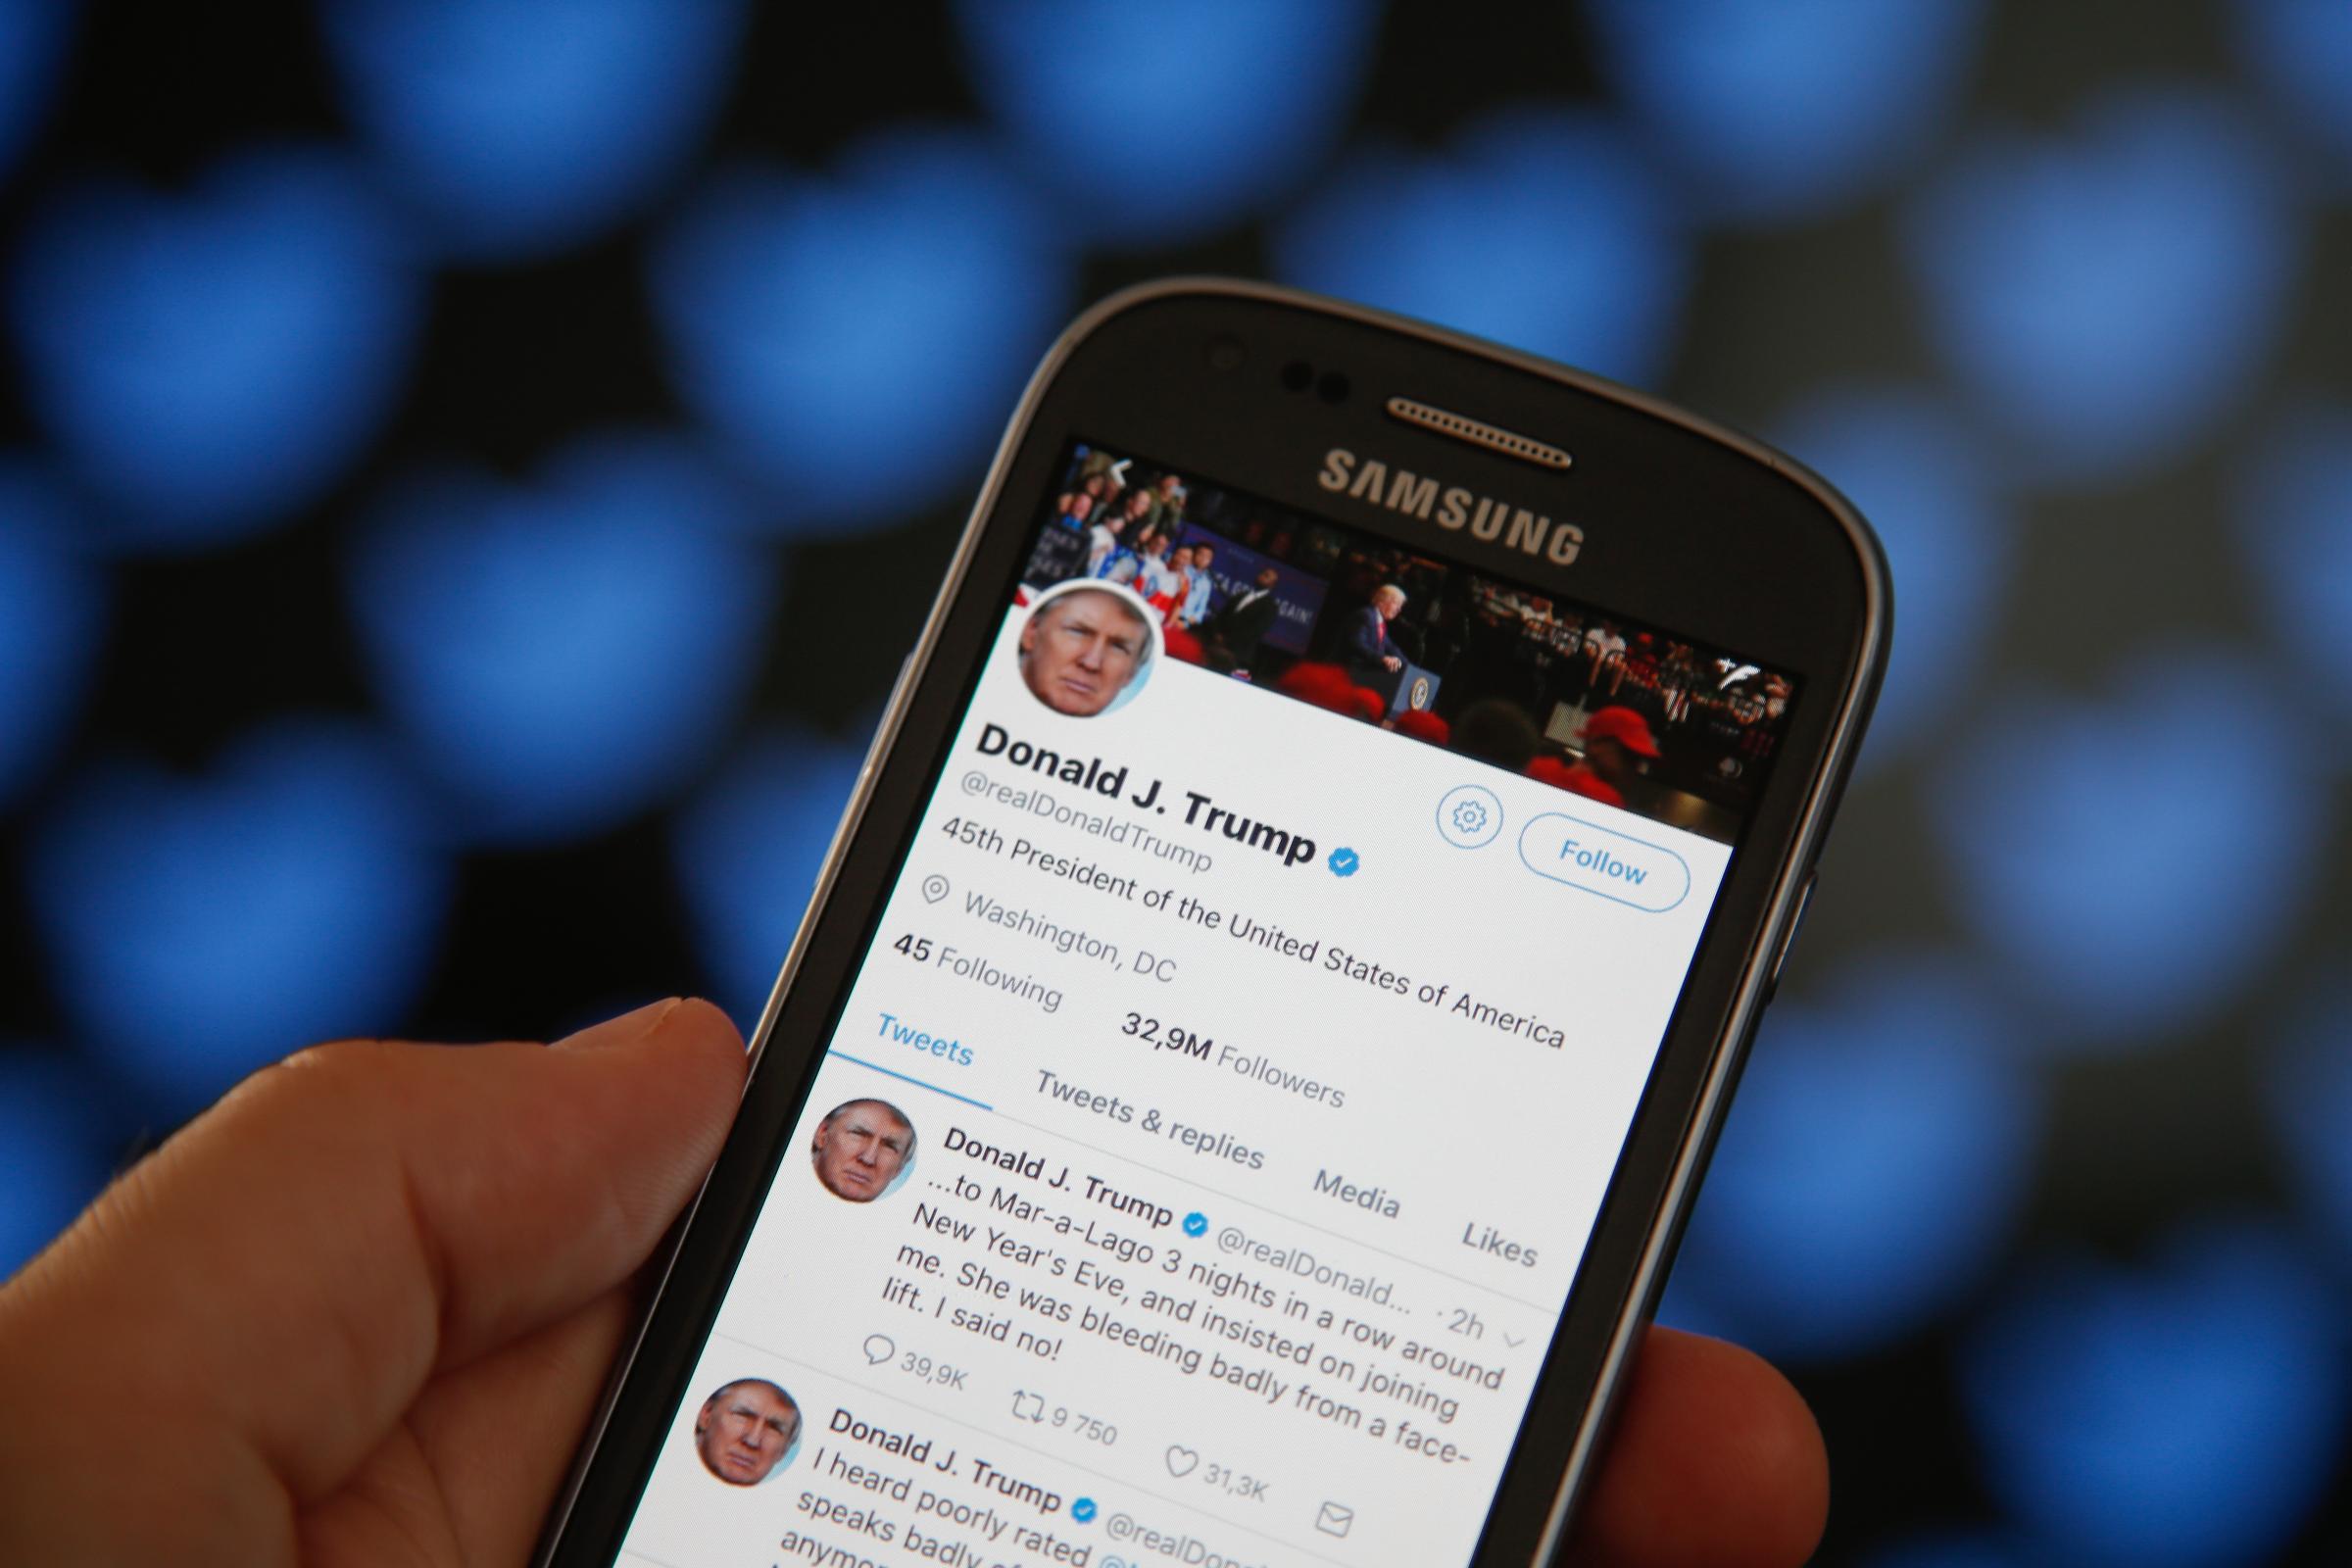 Trump's twitter timeline in front of a screen with the Twitter logo in a patten